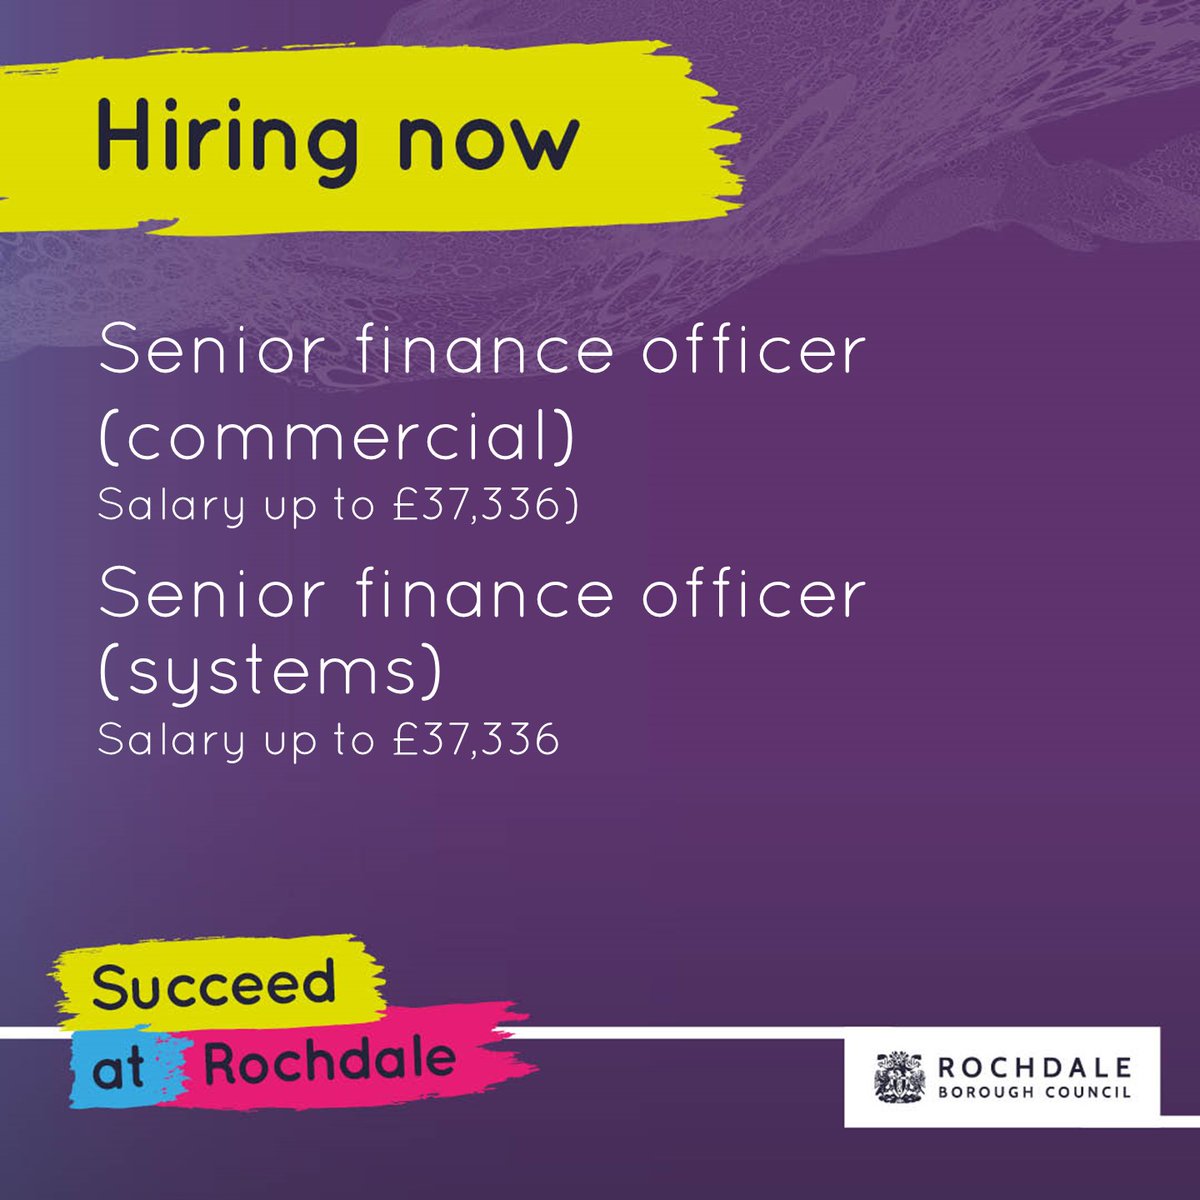 2 exciting opportunities to join our finance team. 👀 These are both senior full time permanent roles.  View the job descriptions, find out more and apply 📲 greater.jobs #SucceedAtRochdale #FinanceJobs #HiringNow